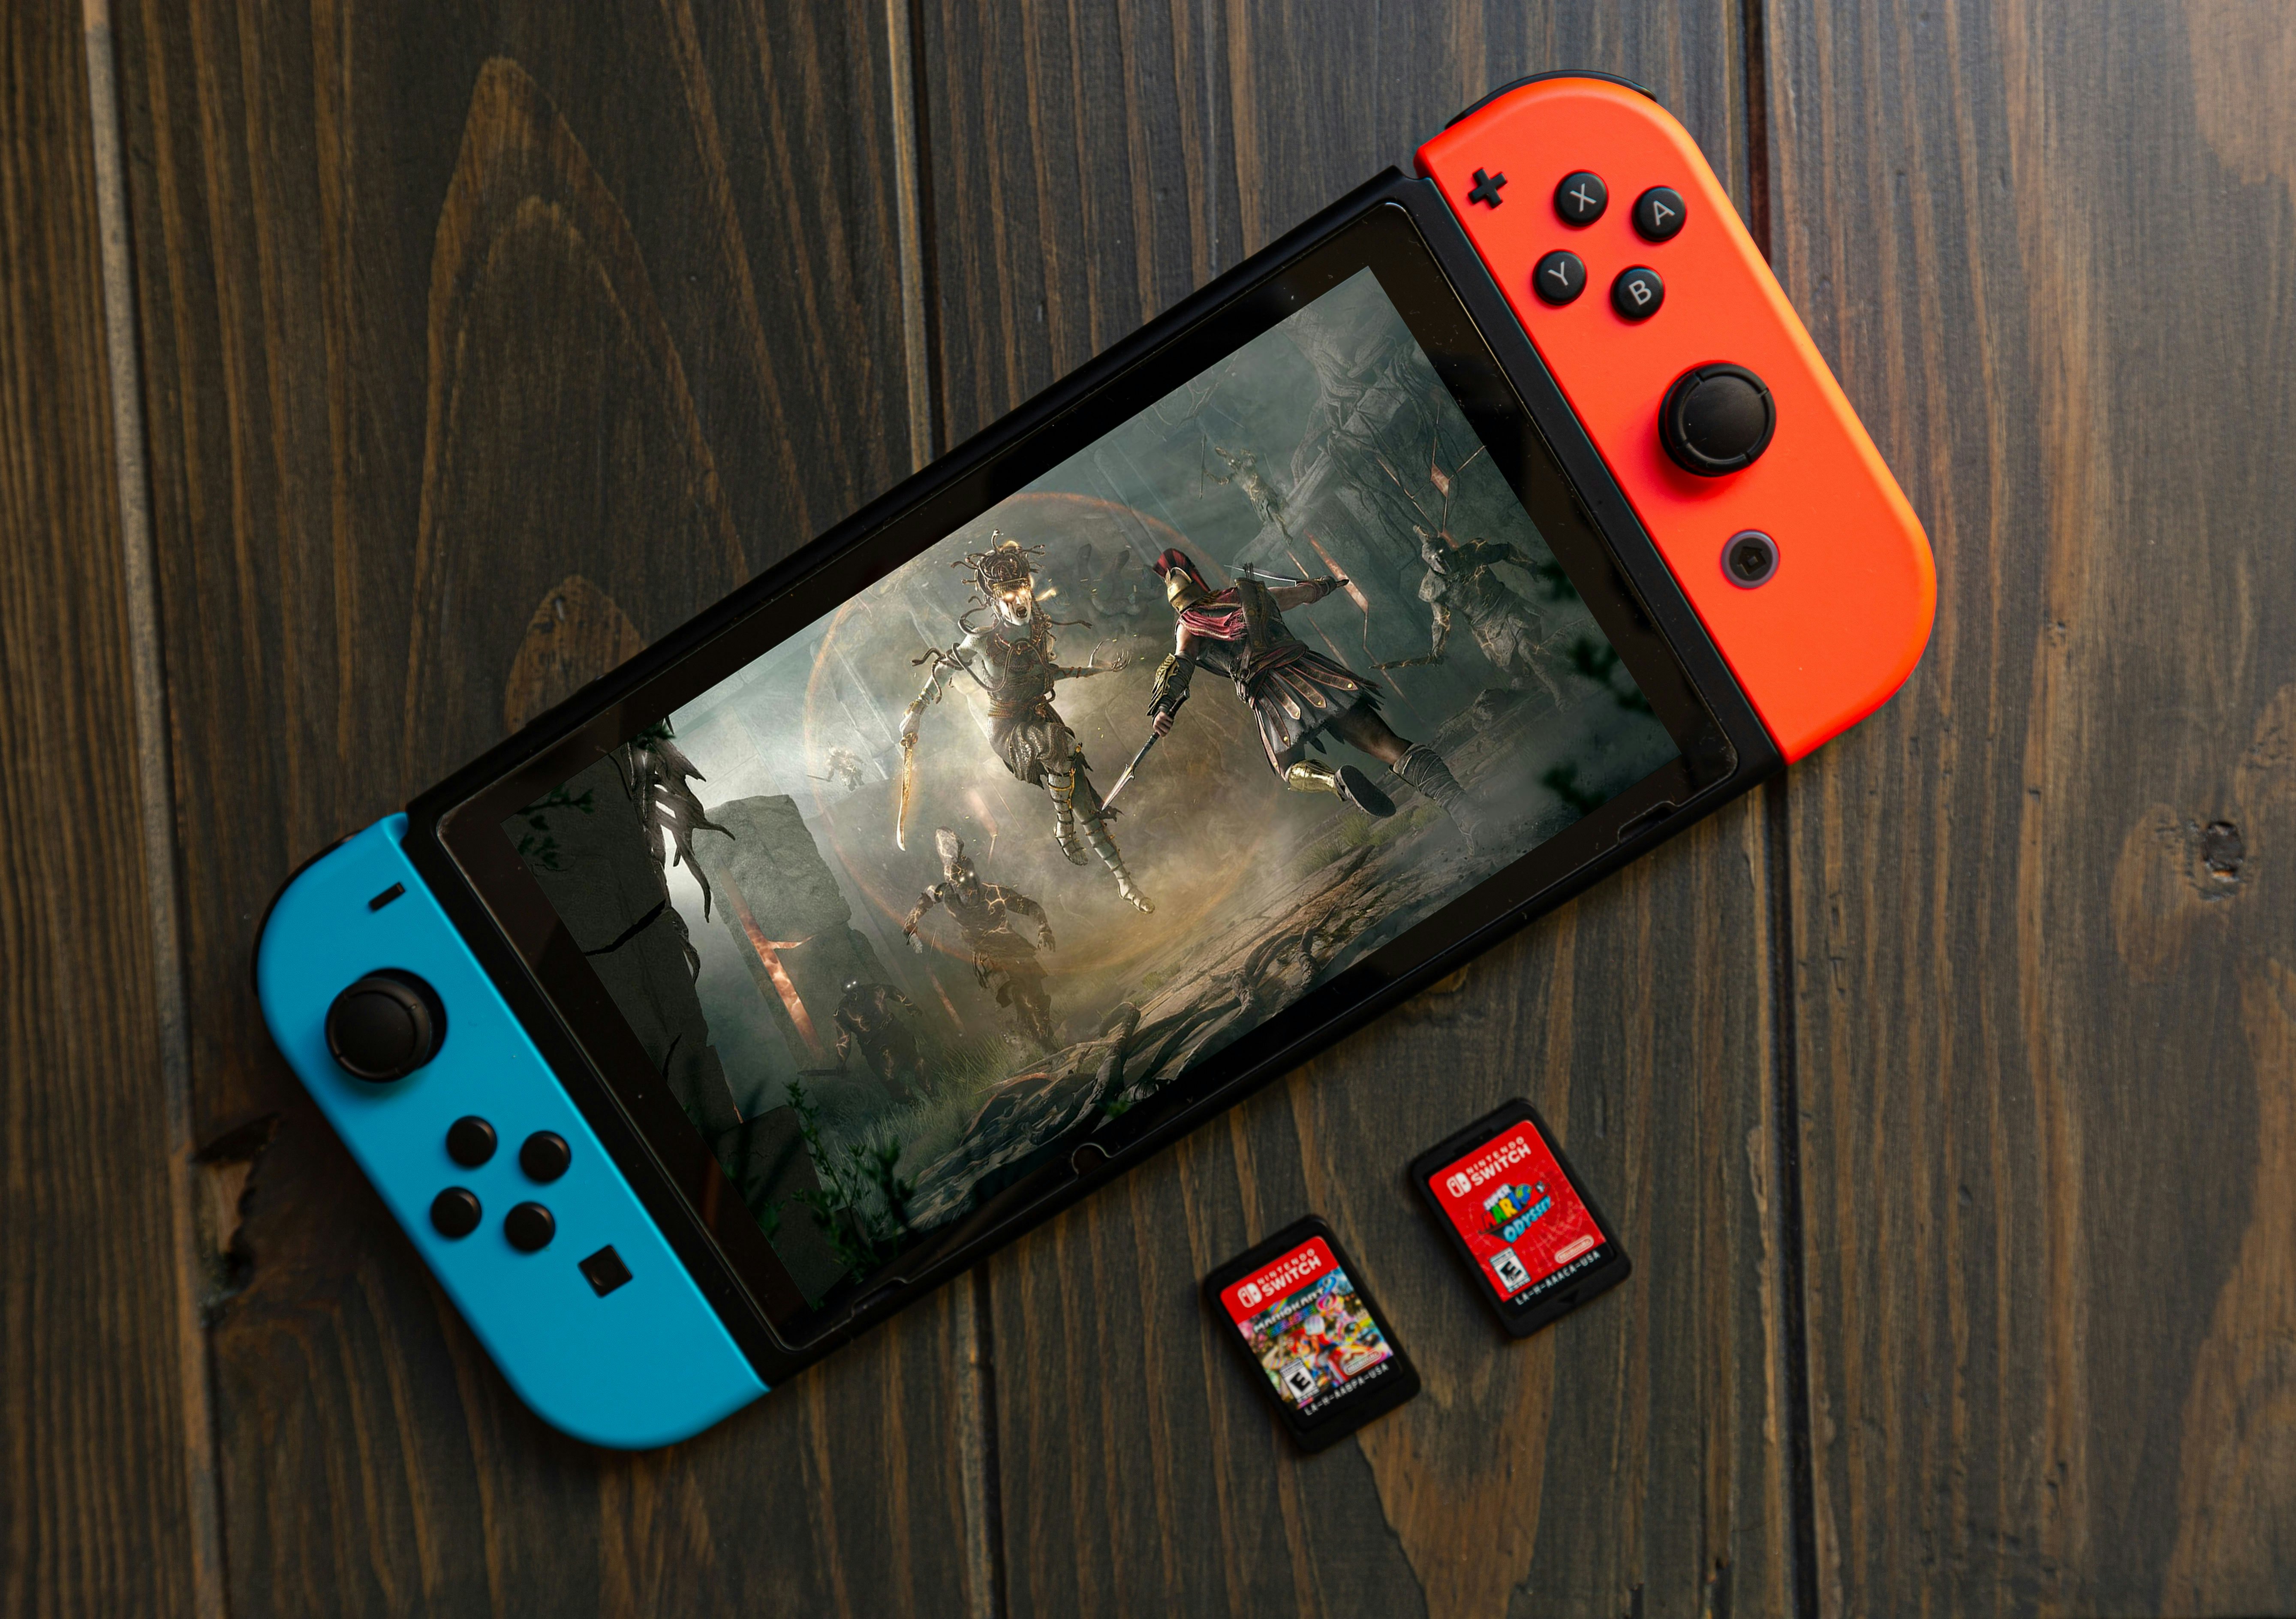 nintendo switch assassin's creed